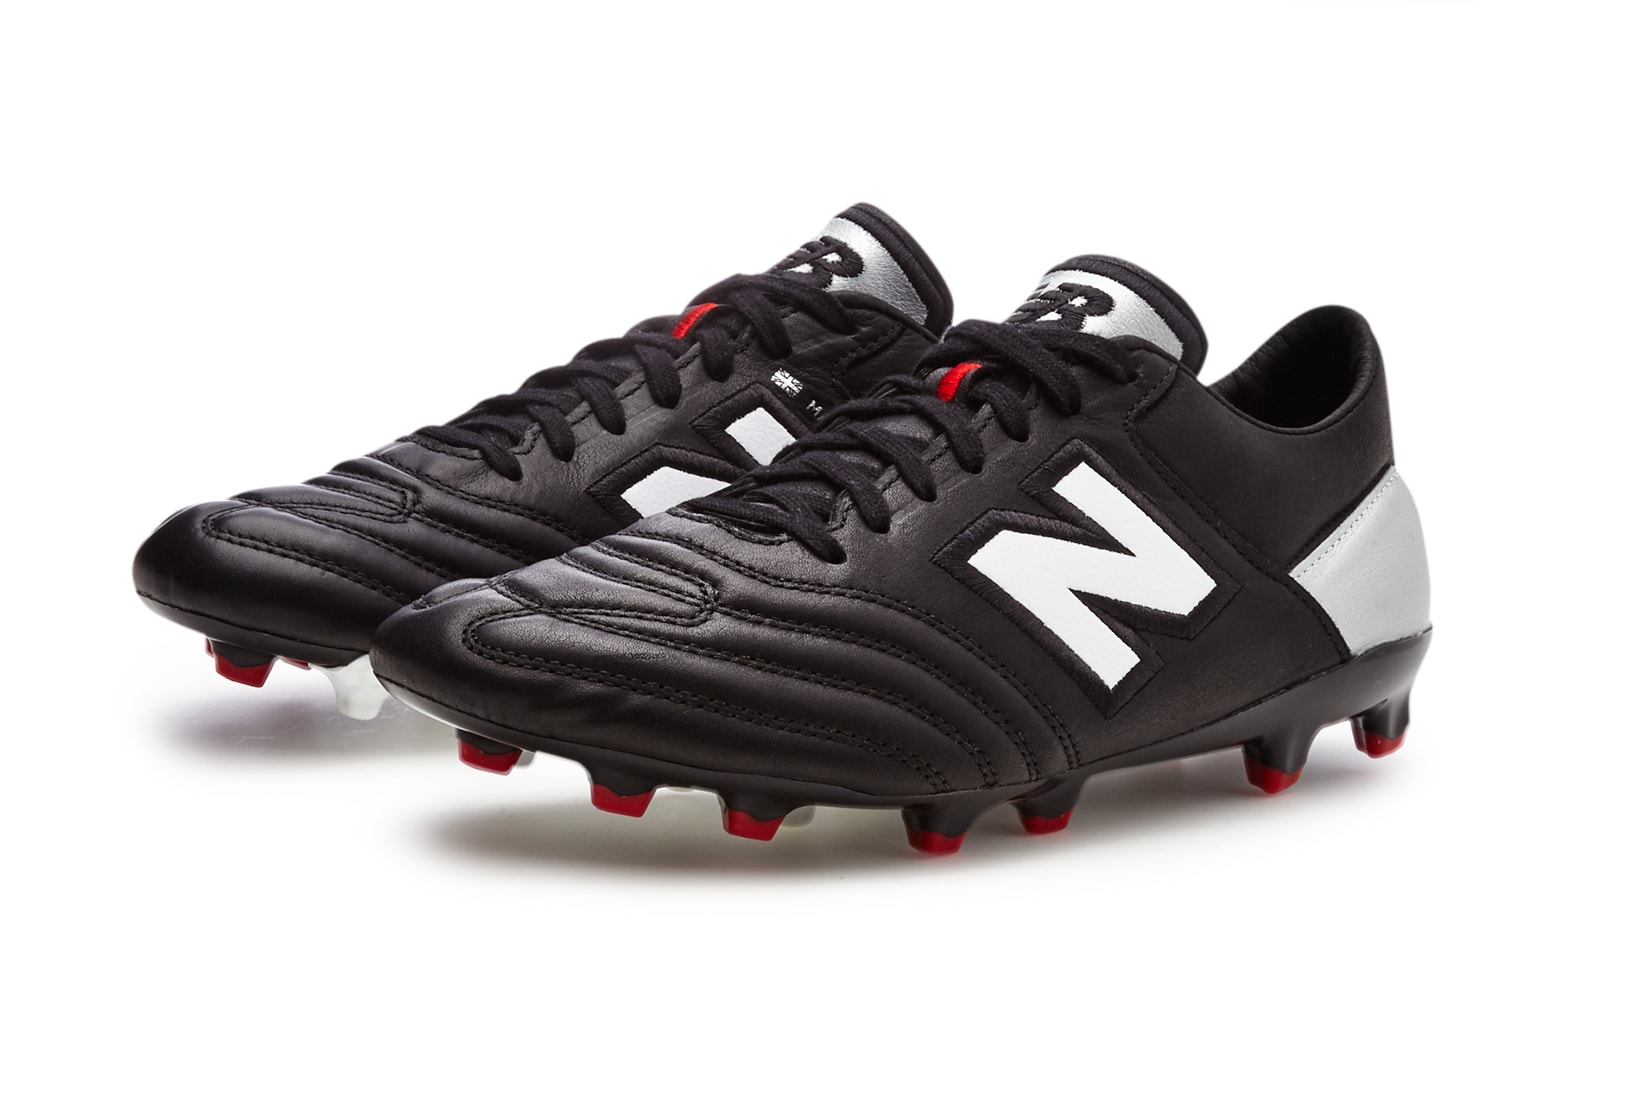 New Balance MiUK ONE Football Boot Launch Made In Britain